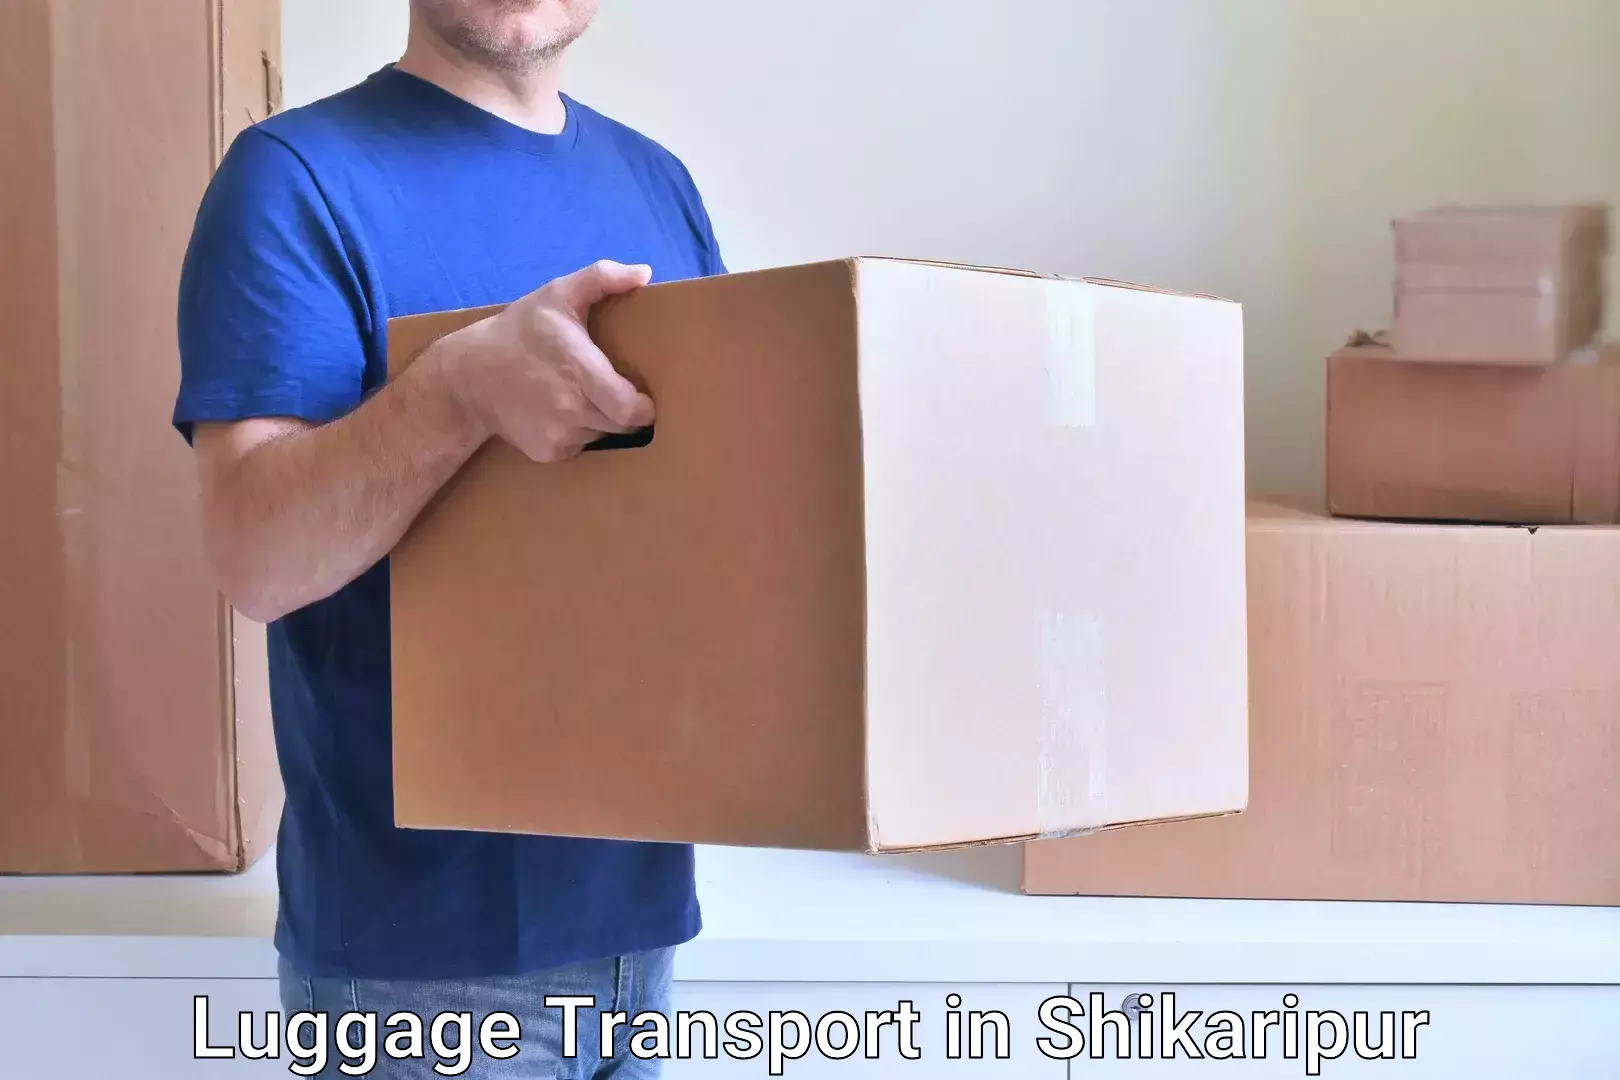 Luggage shipping trends in Shikaripur